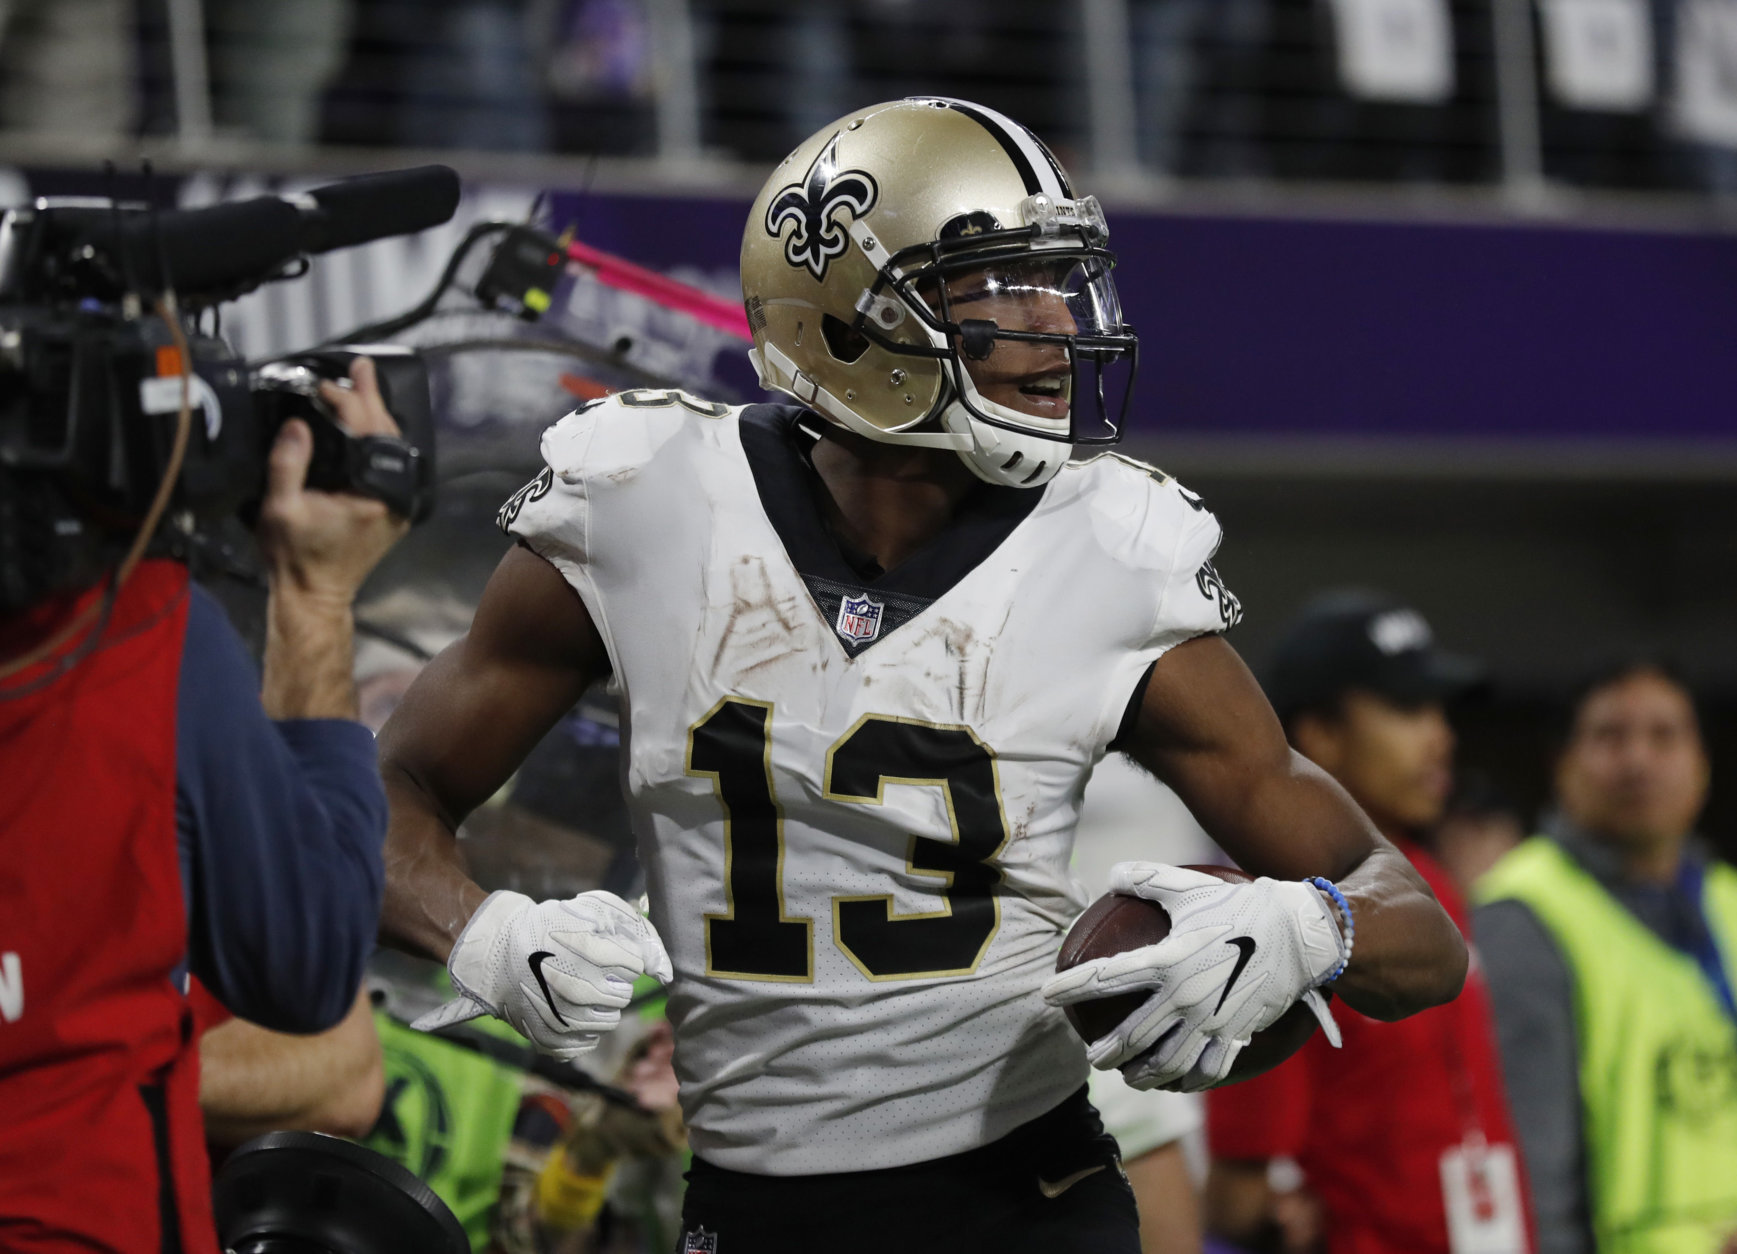 New Orleans Saints wide receiver Michael Thomas (13) celebrates his touchdown catch during the second half of an NFL divisional football playoff game against the Minnesota Vikings in Minneapolis, Sunday, Jan. 14, 2018. (AP Photo/Charlie Neibergall)